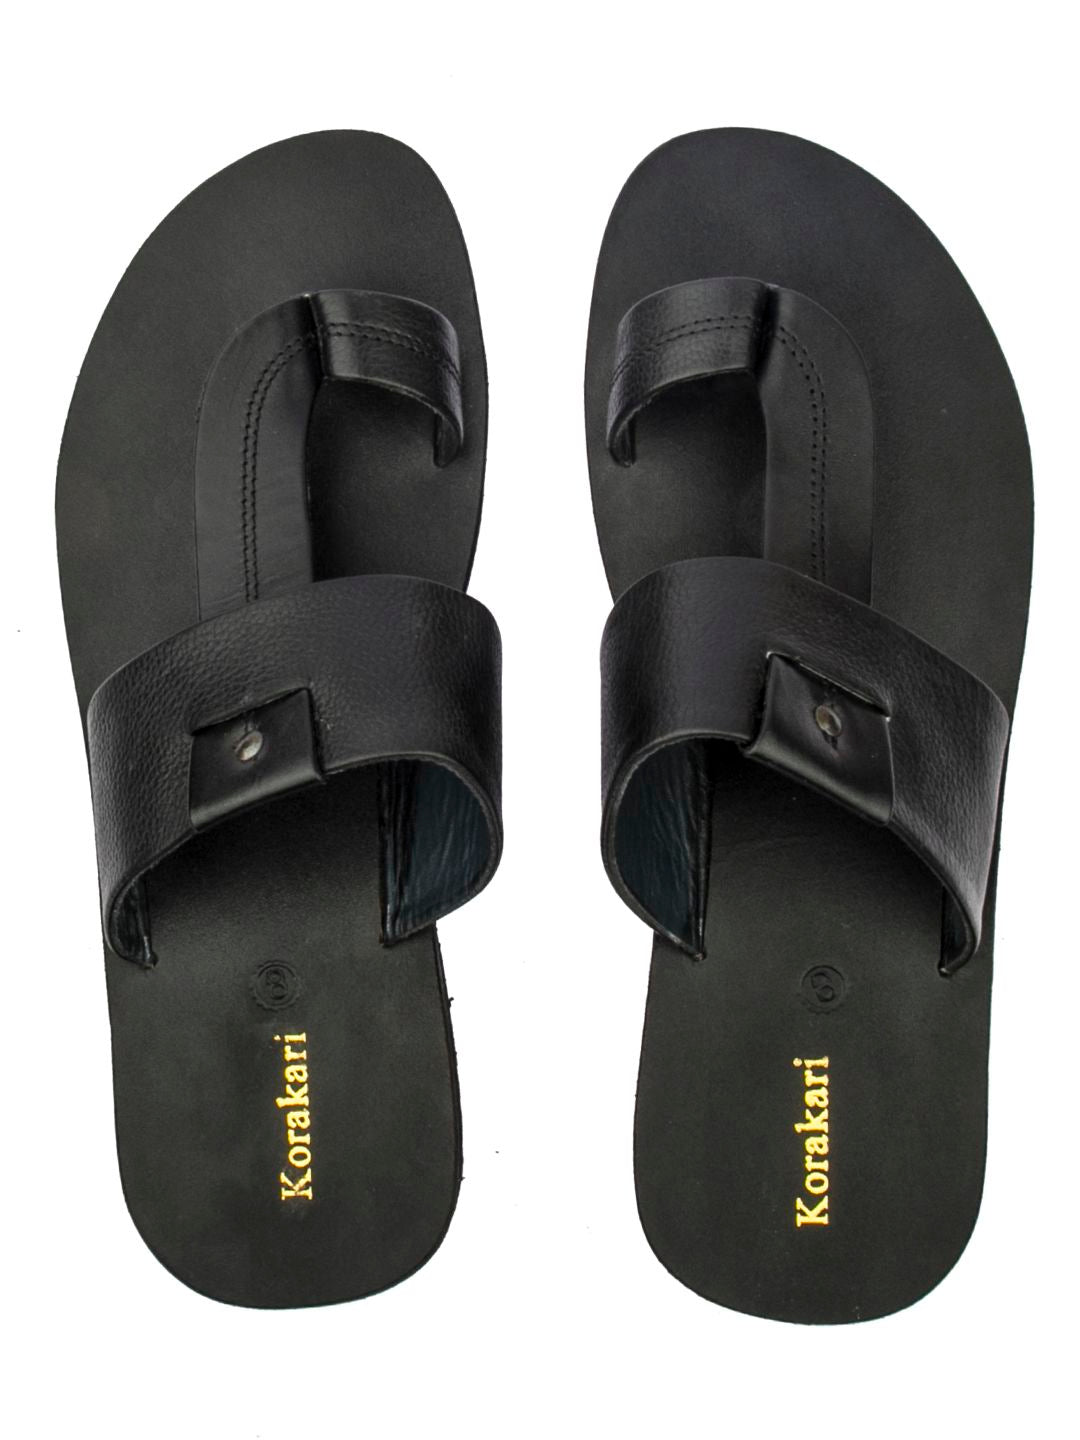 Buy Bora 6078 Open footwear Online at Best Price in India – Urban Country